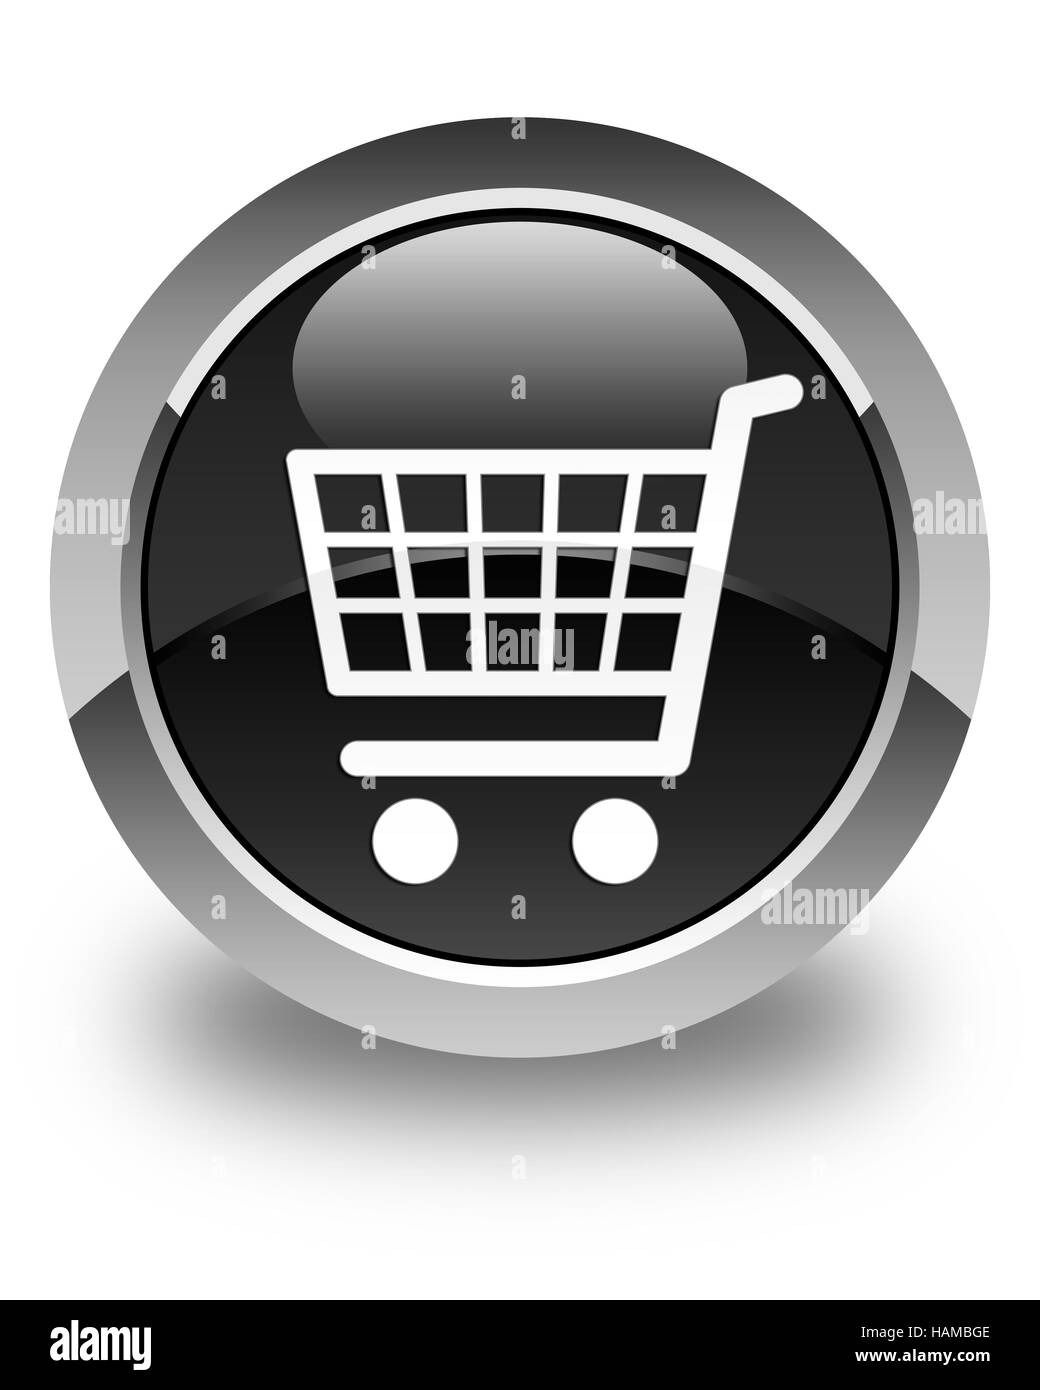 Ecommerce icon isolated on glossy black round button abstract illustration Stock Photo